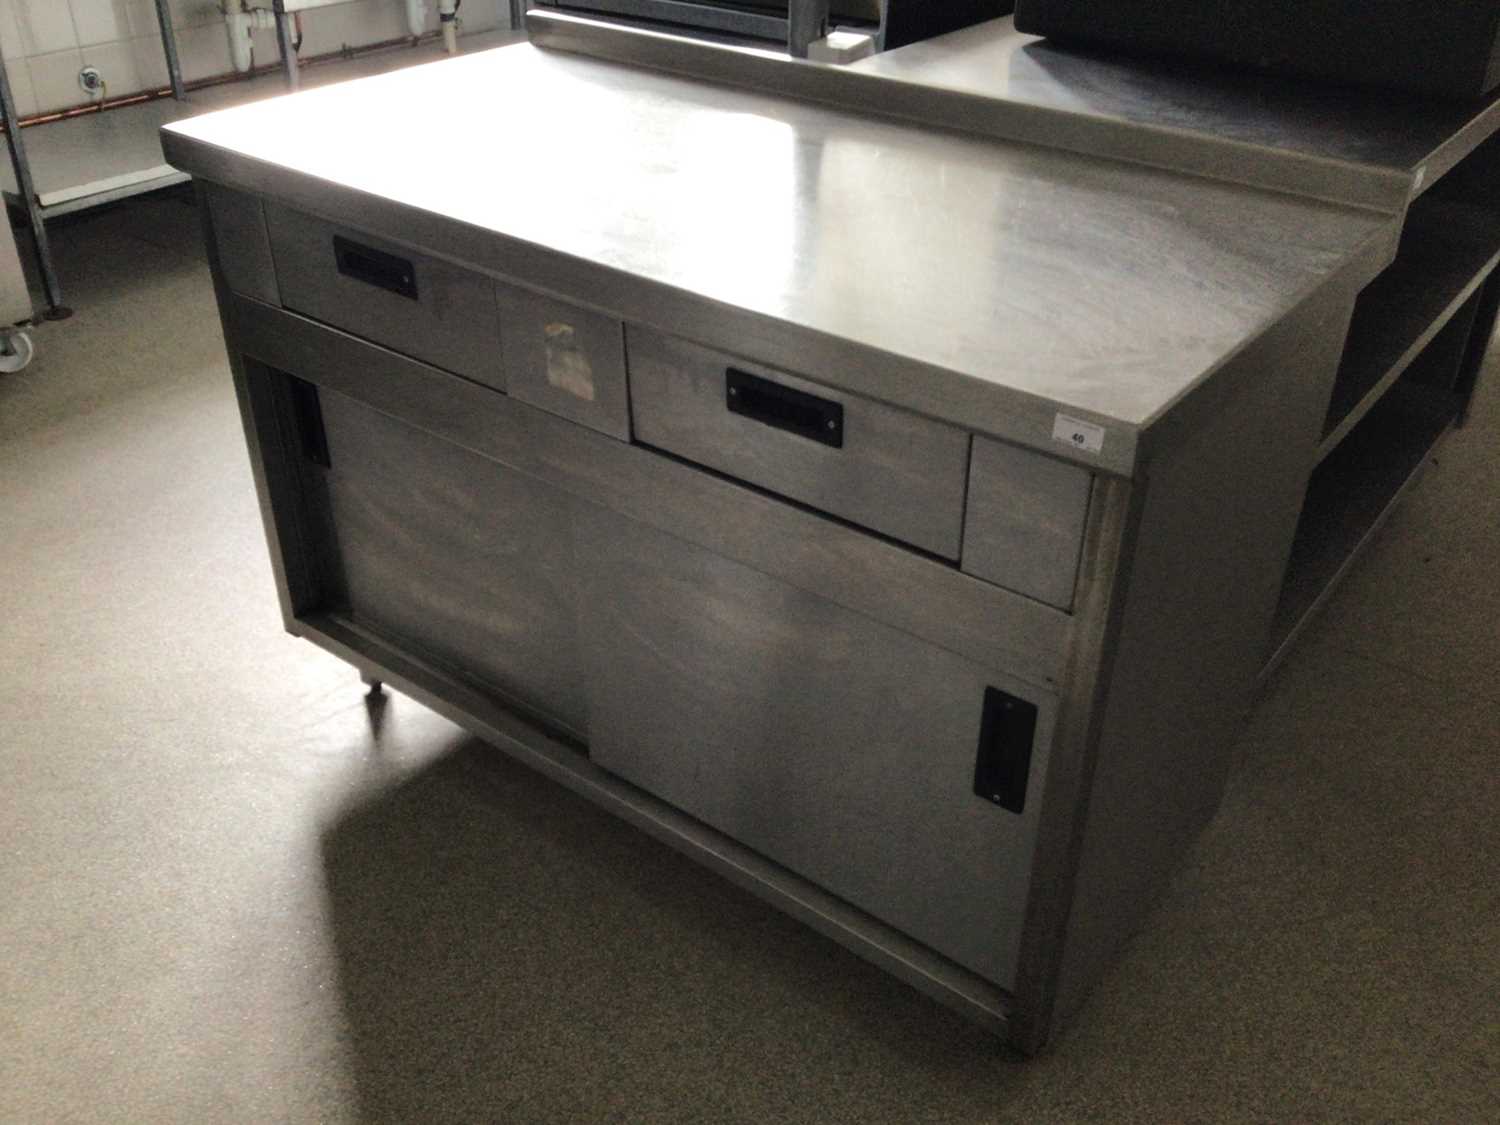 Lot 40 - A wall standing stainless steel preparation bench, with two drawers, and double sliding doors, 1200 mm